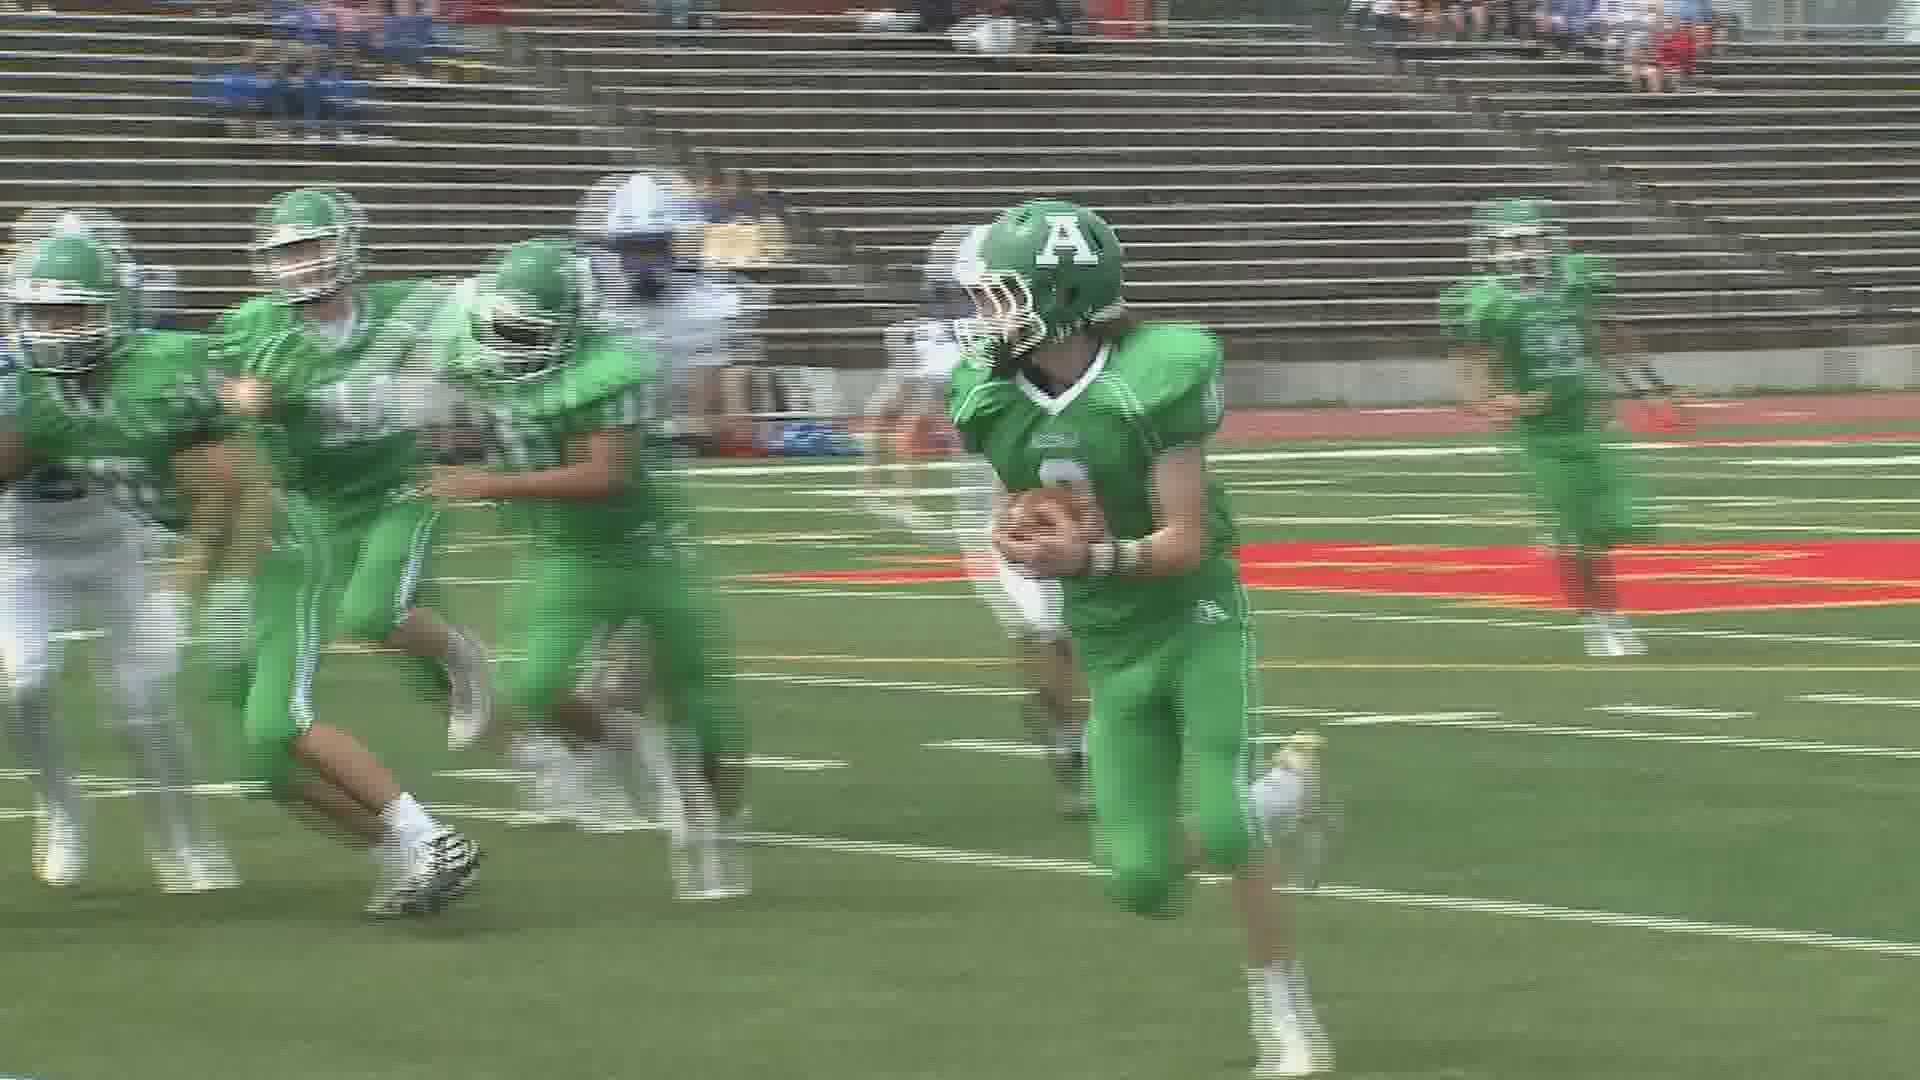 Alleman scores on their first drive. Then has a comeback to beat Quincy in football.